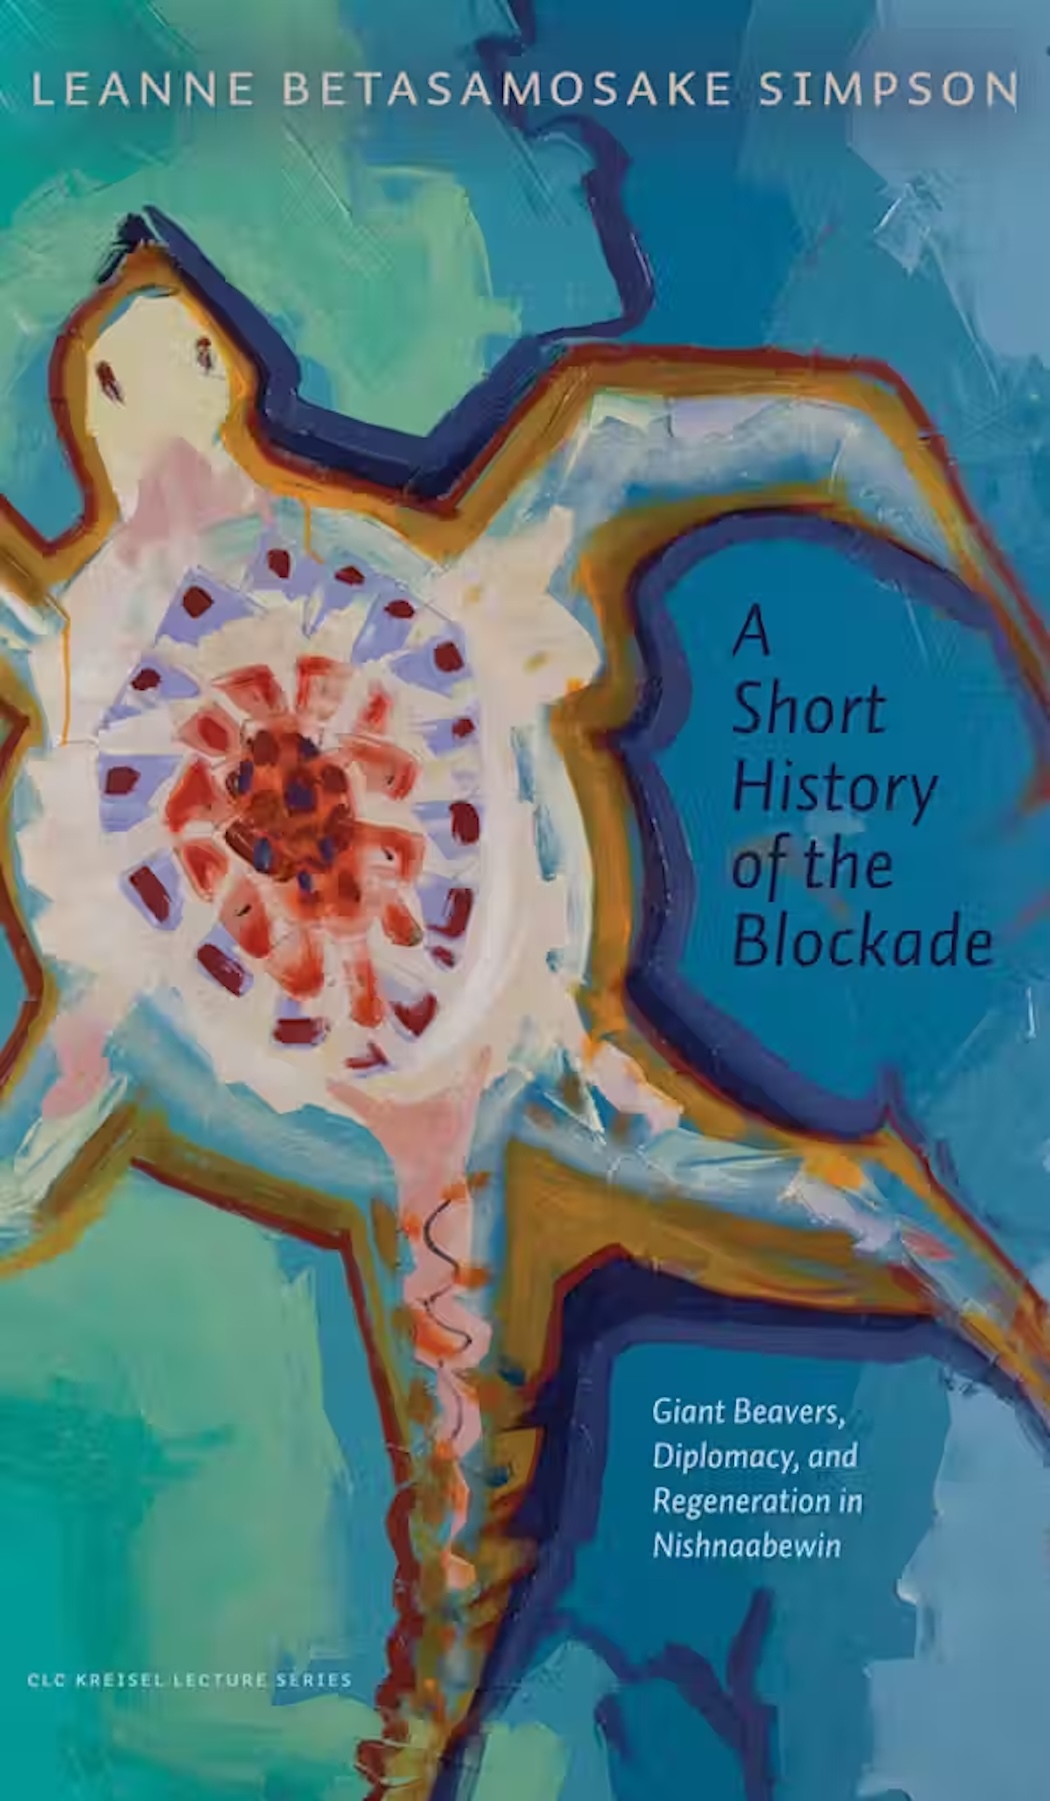 Cover Image of Leanne Simpson's Kreisel Publication Titled A Short History of the Blockade